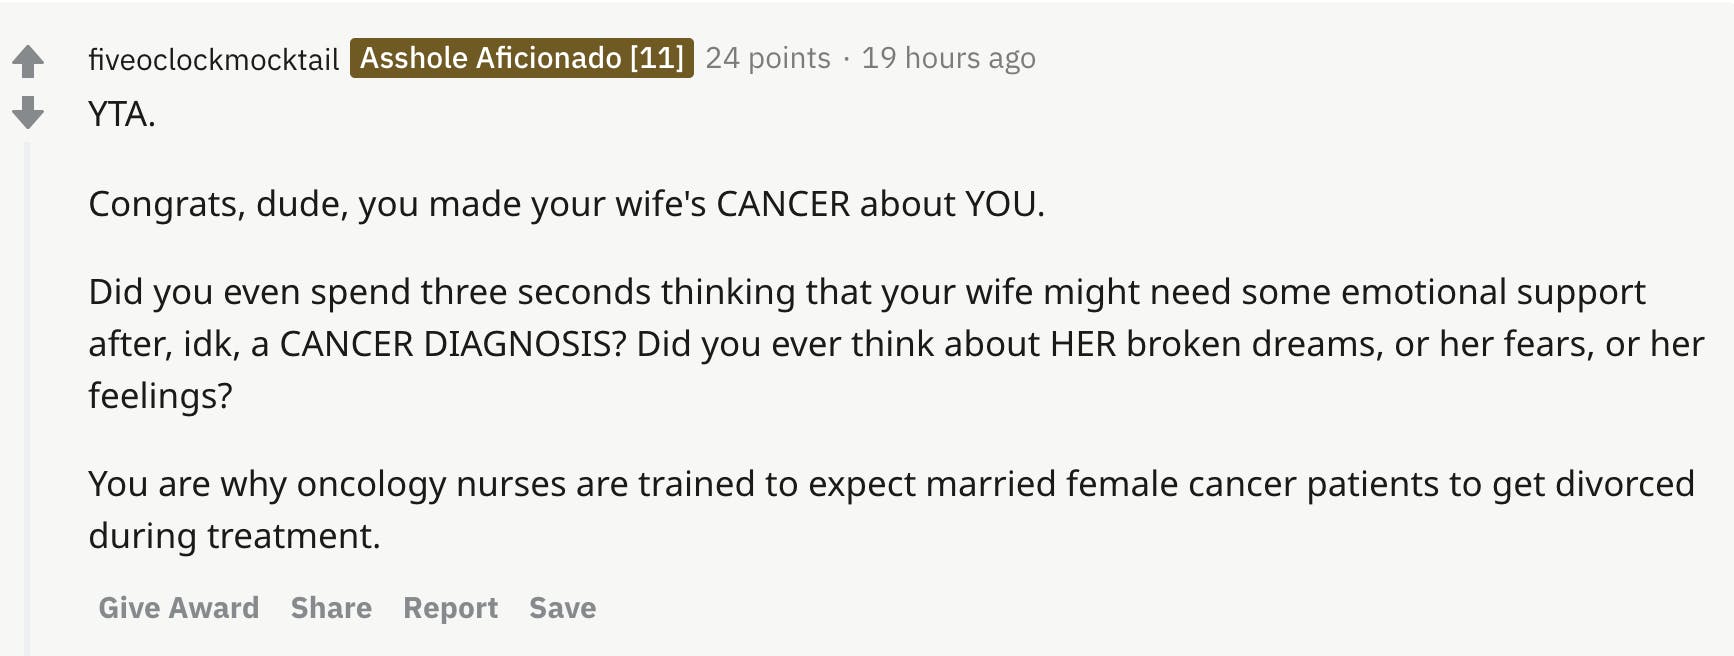 YTA.  Congrats, dude, you made your wife's CANCER about YOU.  Did you even spend three seconds thinking that your wife might need some emotional support after, idk, a CANCER DIAGNOSIS? Did you ever think about HER broken dreams, or her fears, or her feelings?  You are why oncology nurses are trained to expect married female cancer patients to get divorced during treatment.